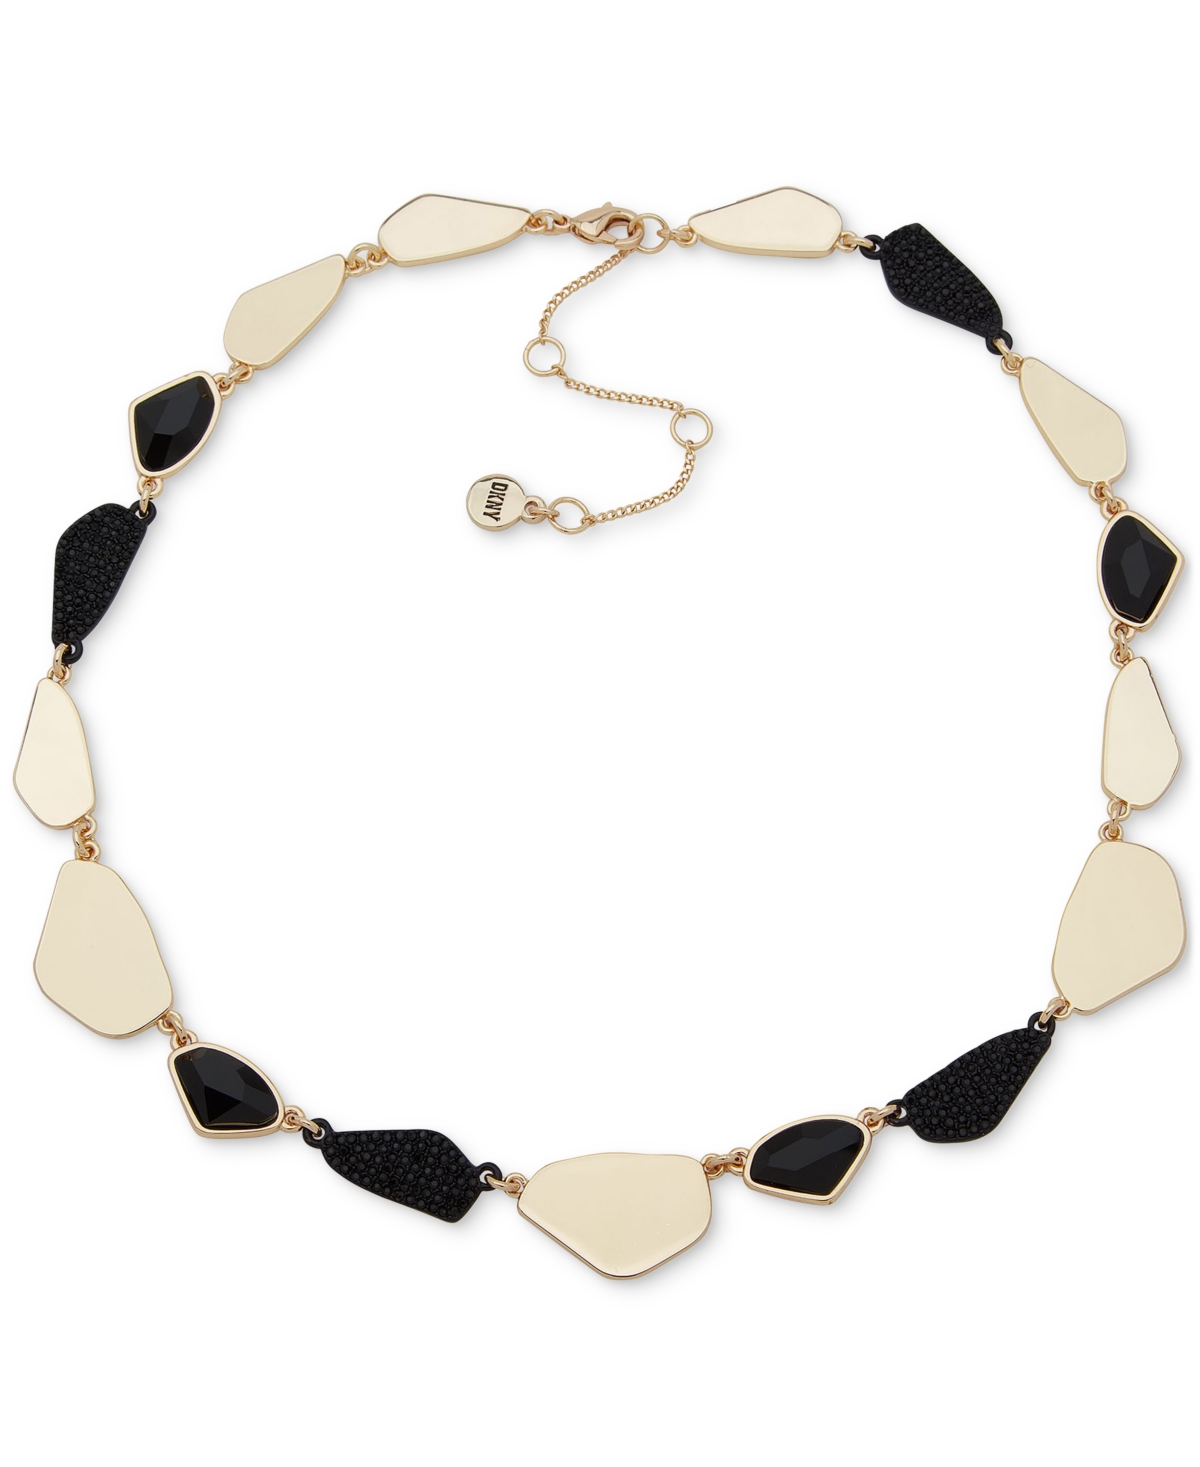 Two-Tone Crystal All-Around Collar Necklace, 16" + 3" extender - Black